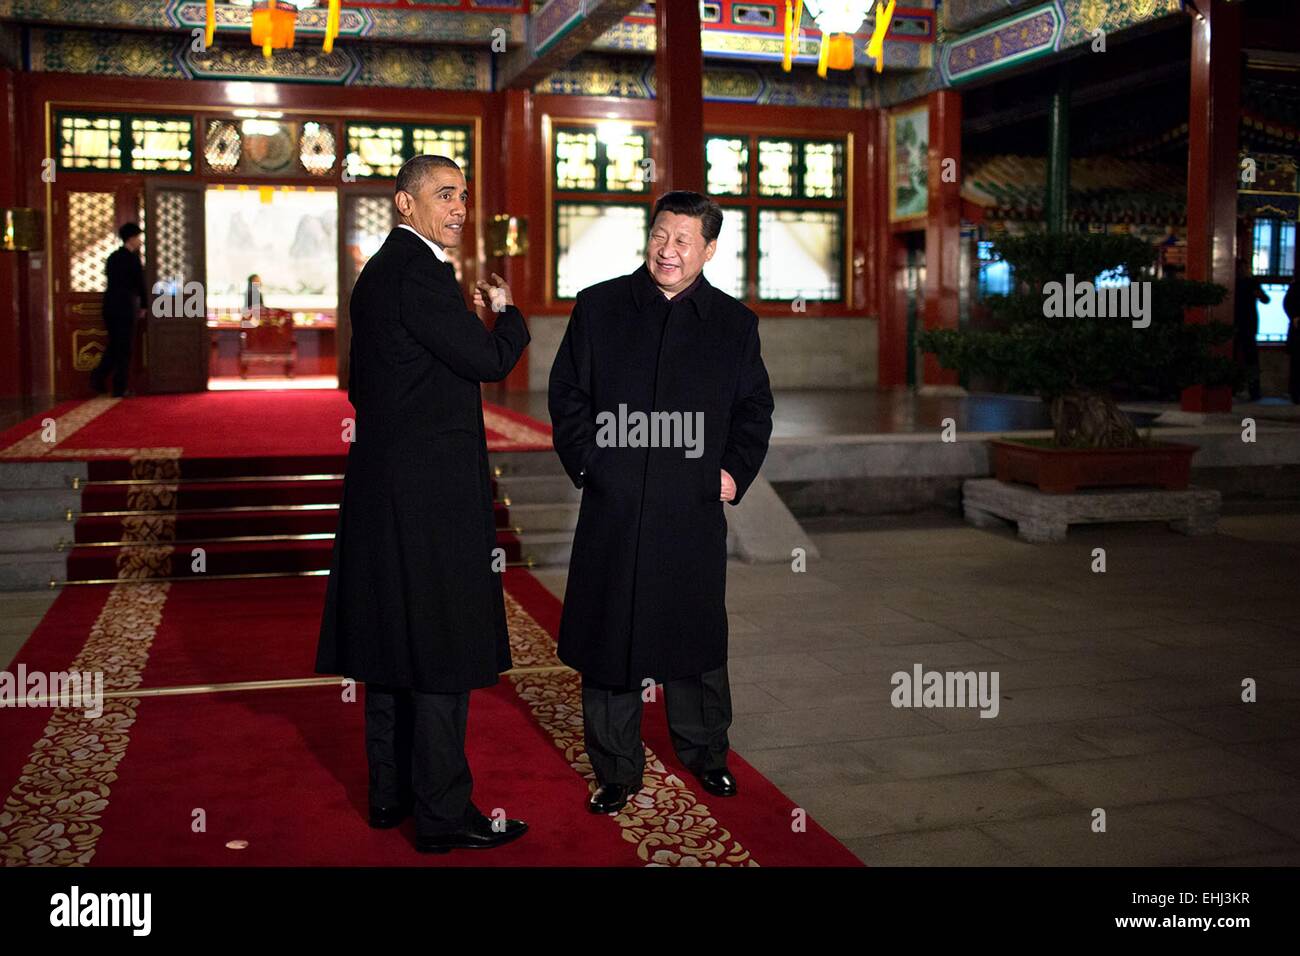 US President Barack Obama gestures as he and President Xi Jinping of China arrive for a bilateral meeting at Zhong Nan Hai November 11, 2014 in Beijing, China. Stock Photo